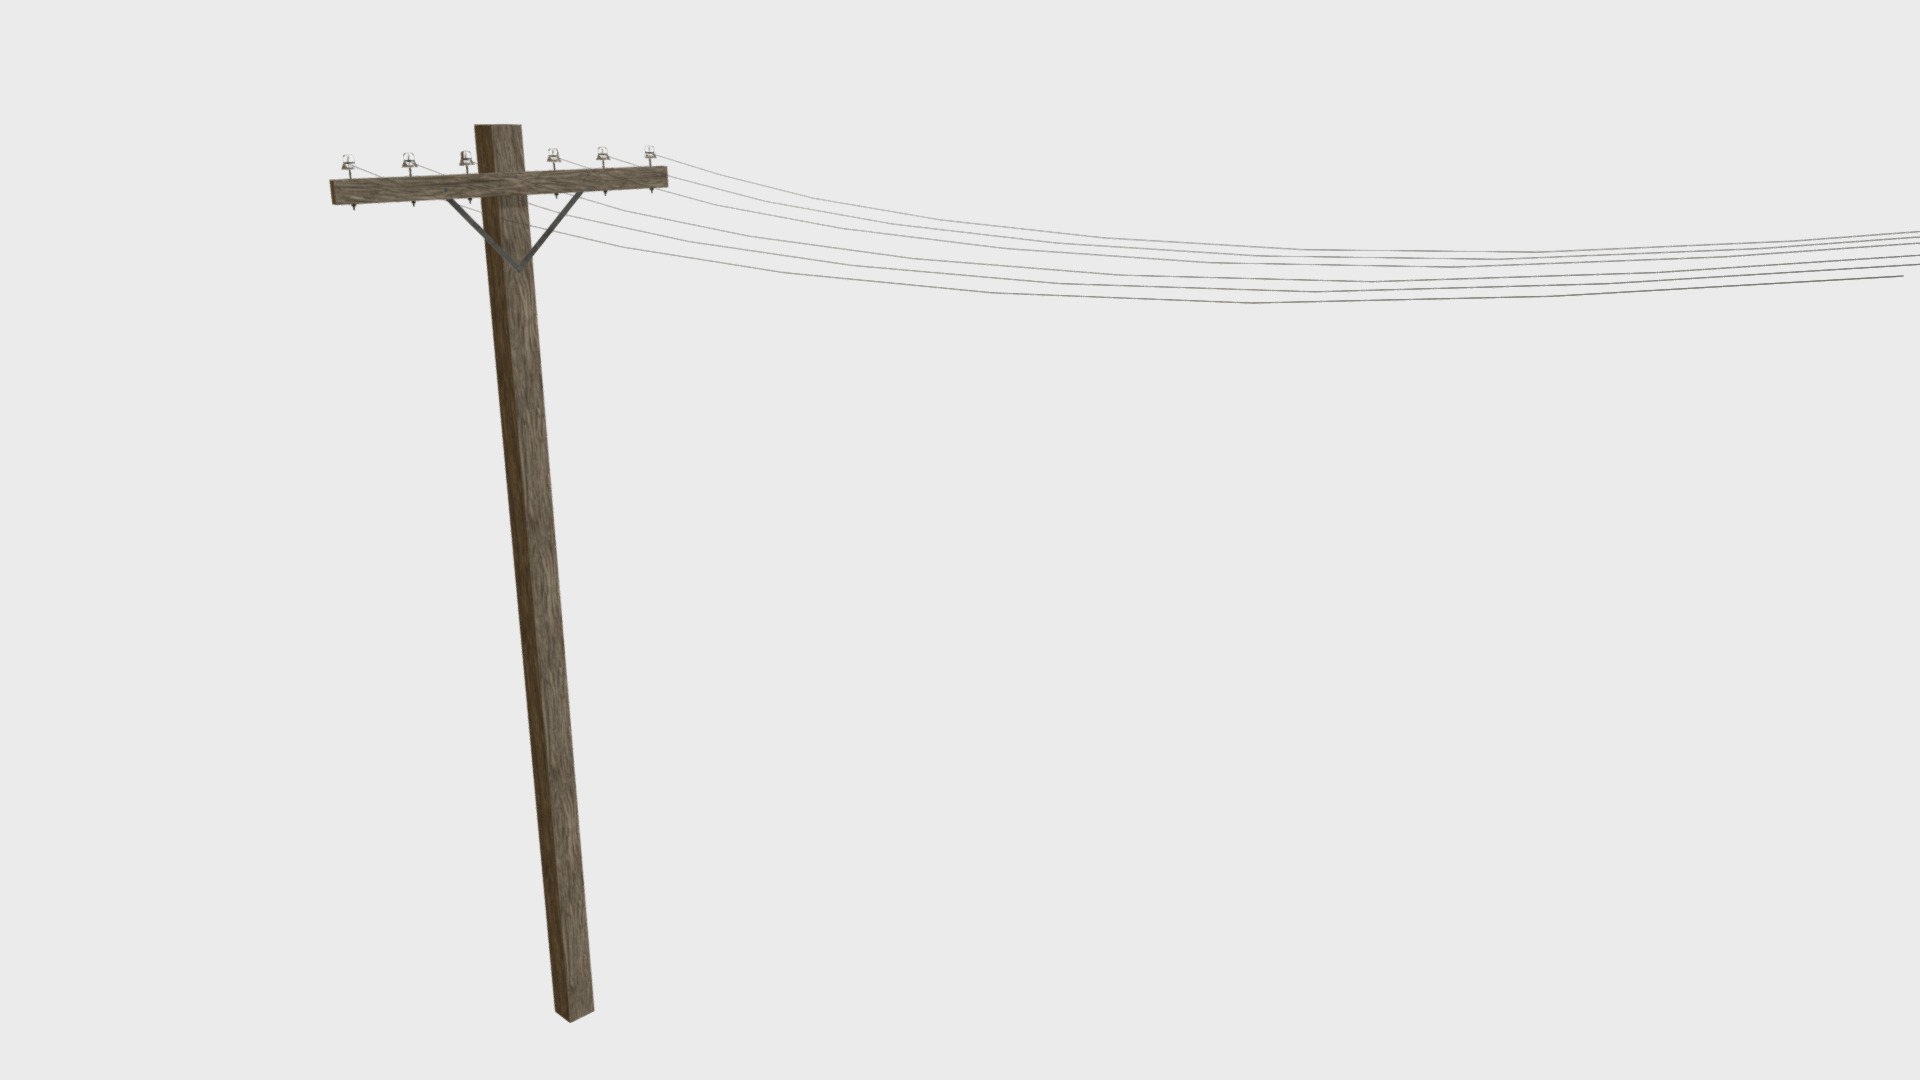 3D model Wooden telephone pole - This is a 3D model of the Wooden telephone pole. The 3D model is about a wooden pole with a wire attached.